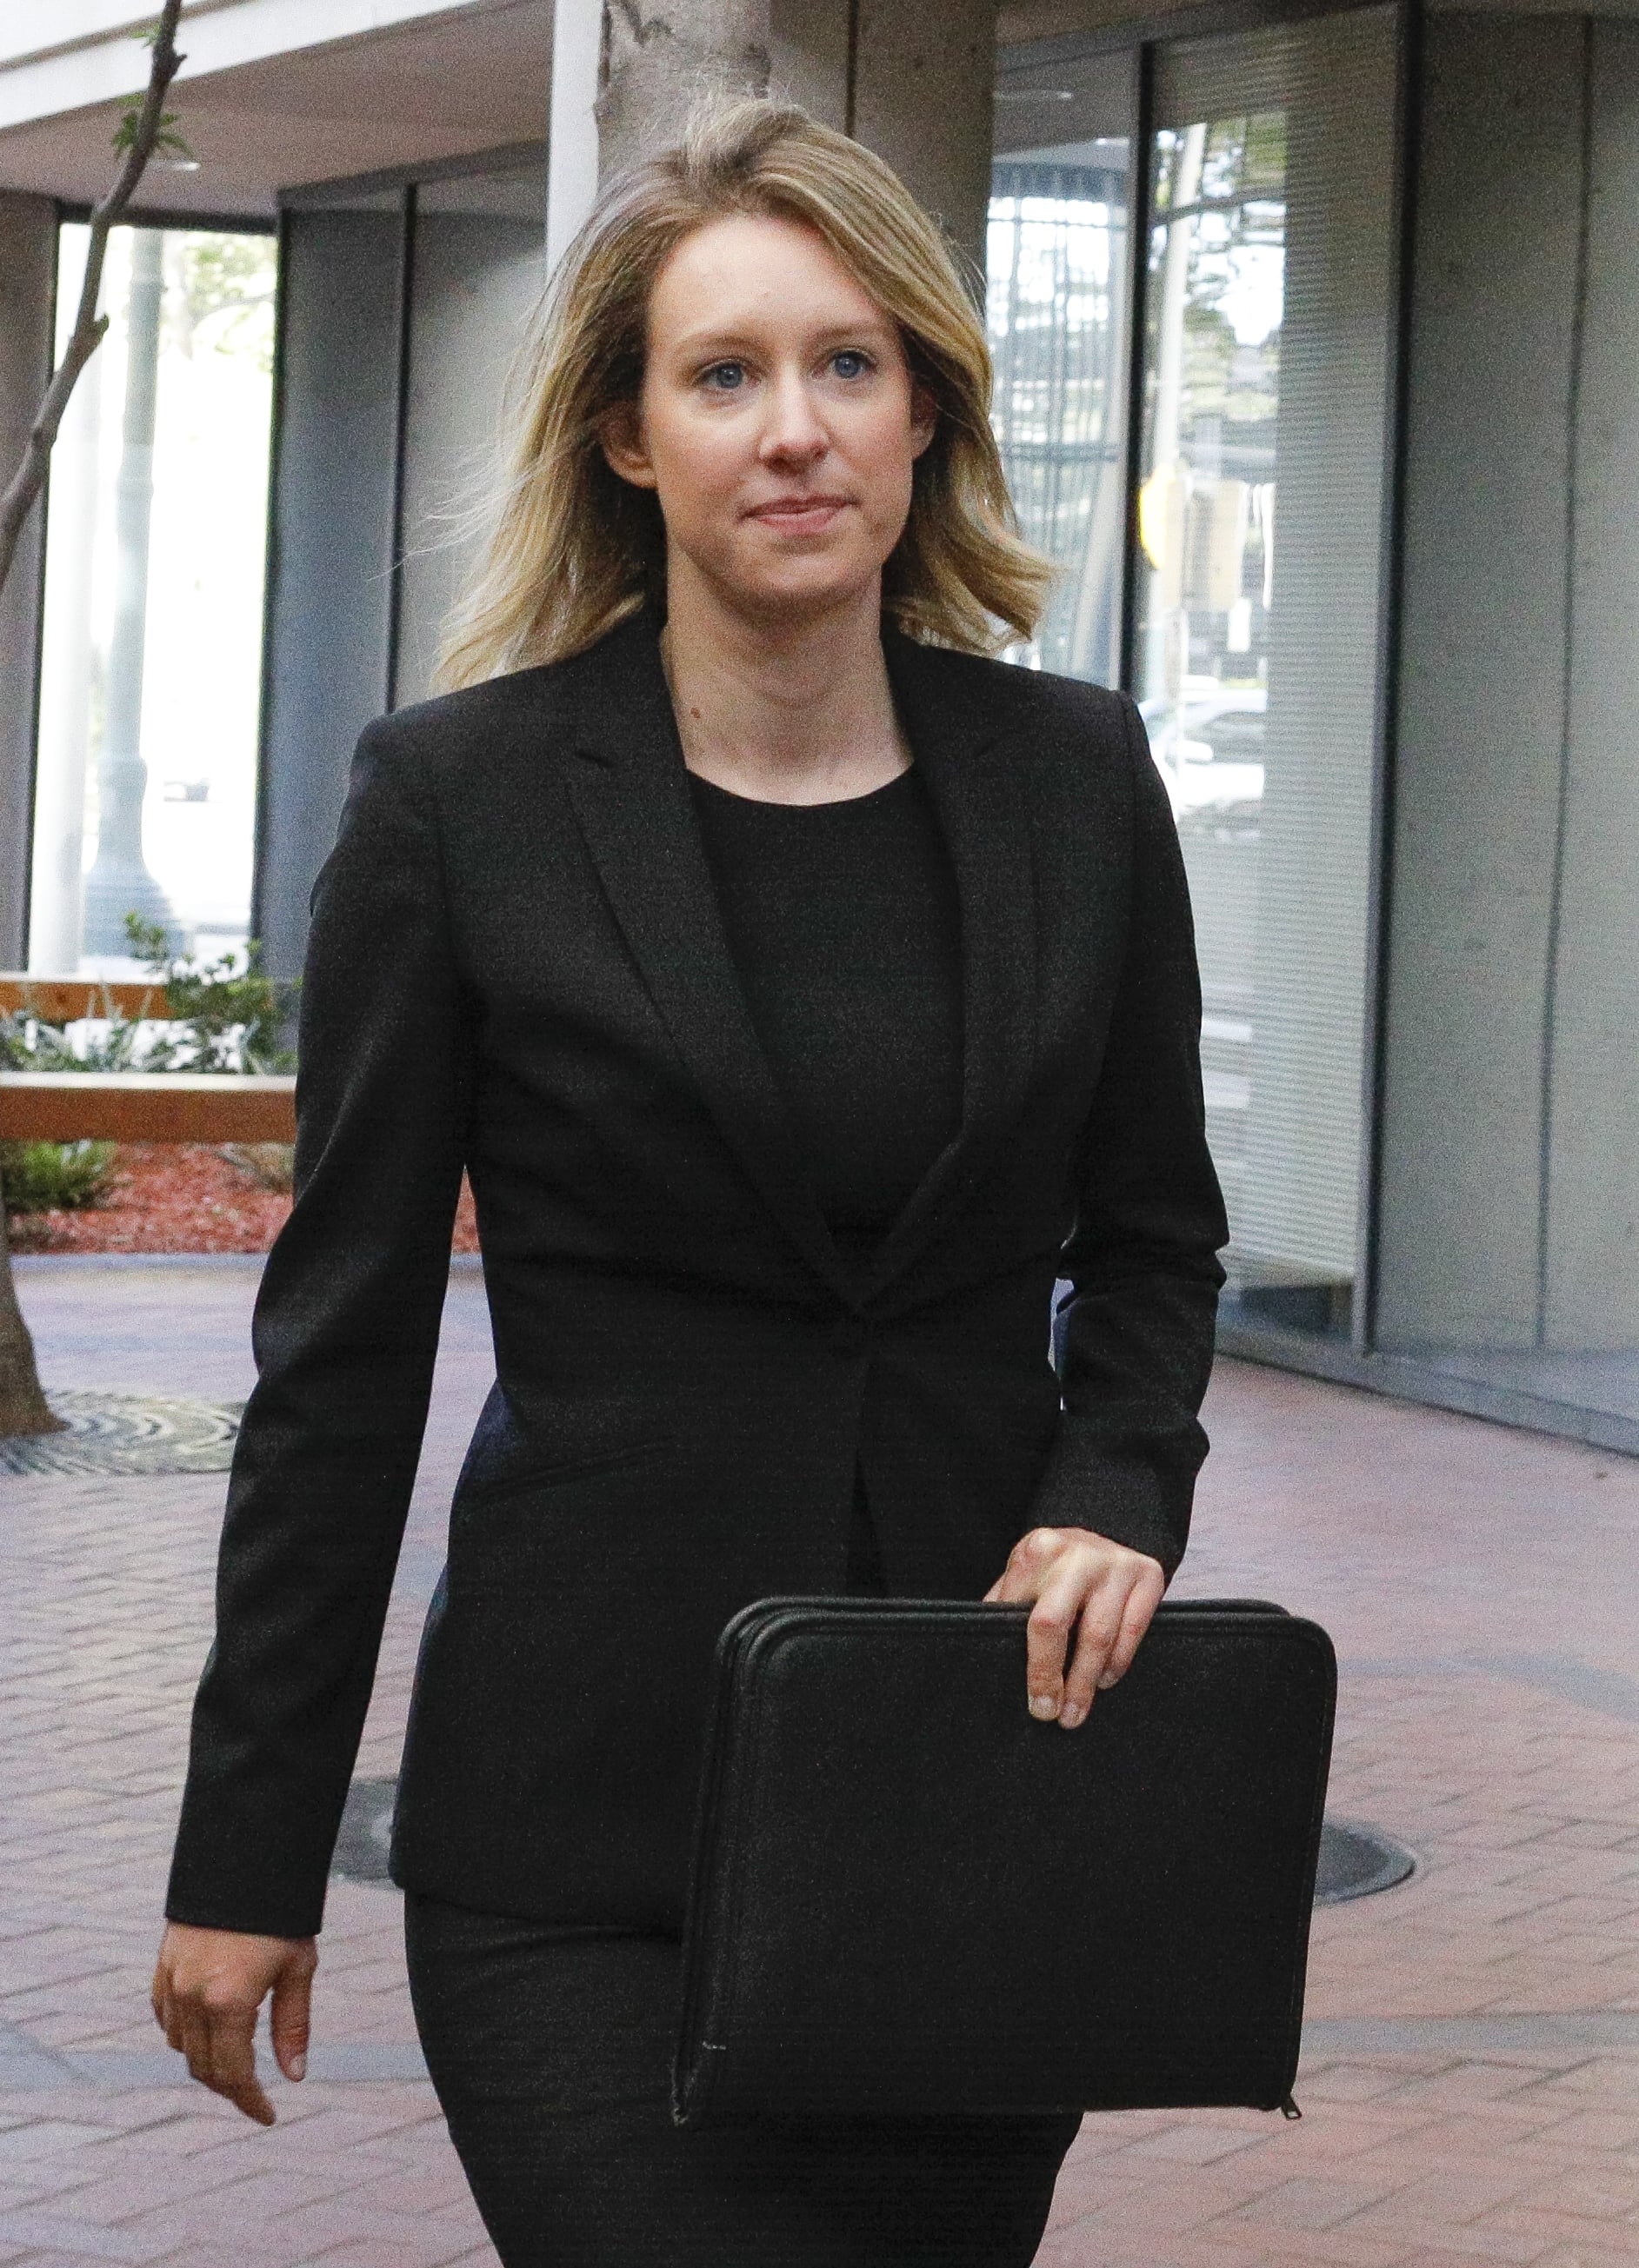 SAN JOSE, CA - JULY 17:  Former Theranos CEO Elizabeth Holmes appears in federal court for a status hearing on July 17, 2019 in San Jose, California. Holmes is facing charges of conspiracy and wire fraud for allegedly engaging in a multimillion-dollar scheme to defraud investors with the Theranos blood testing lab services. (Photo by Kimberly White/Getty Images)